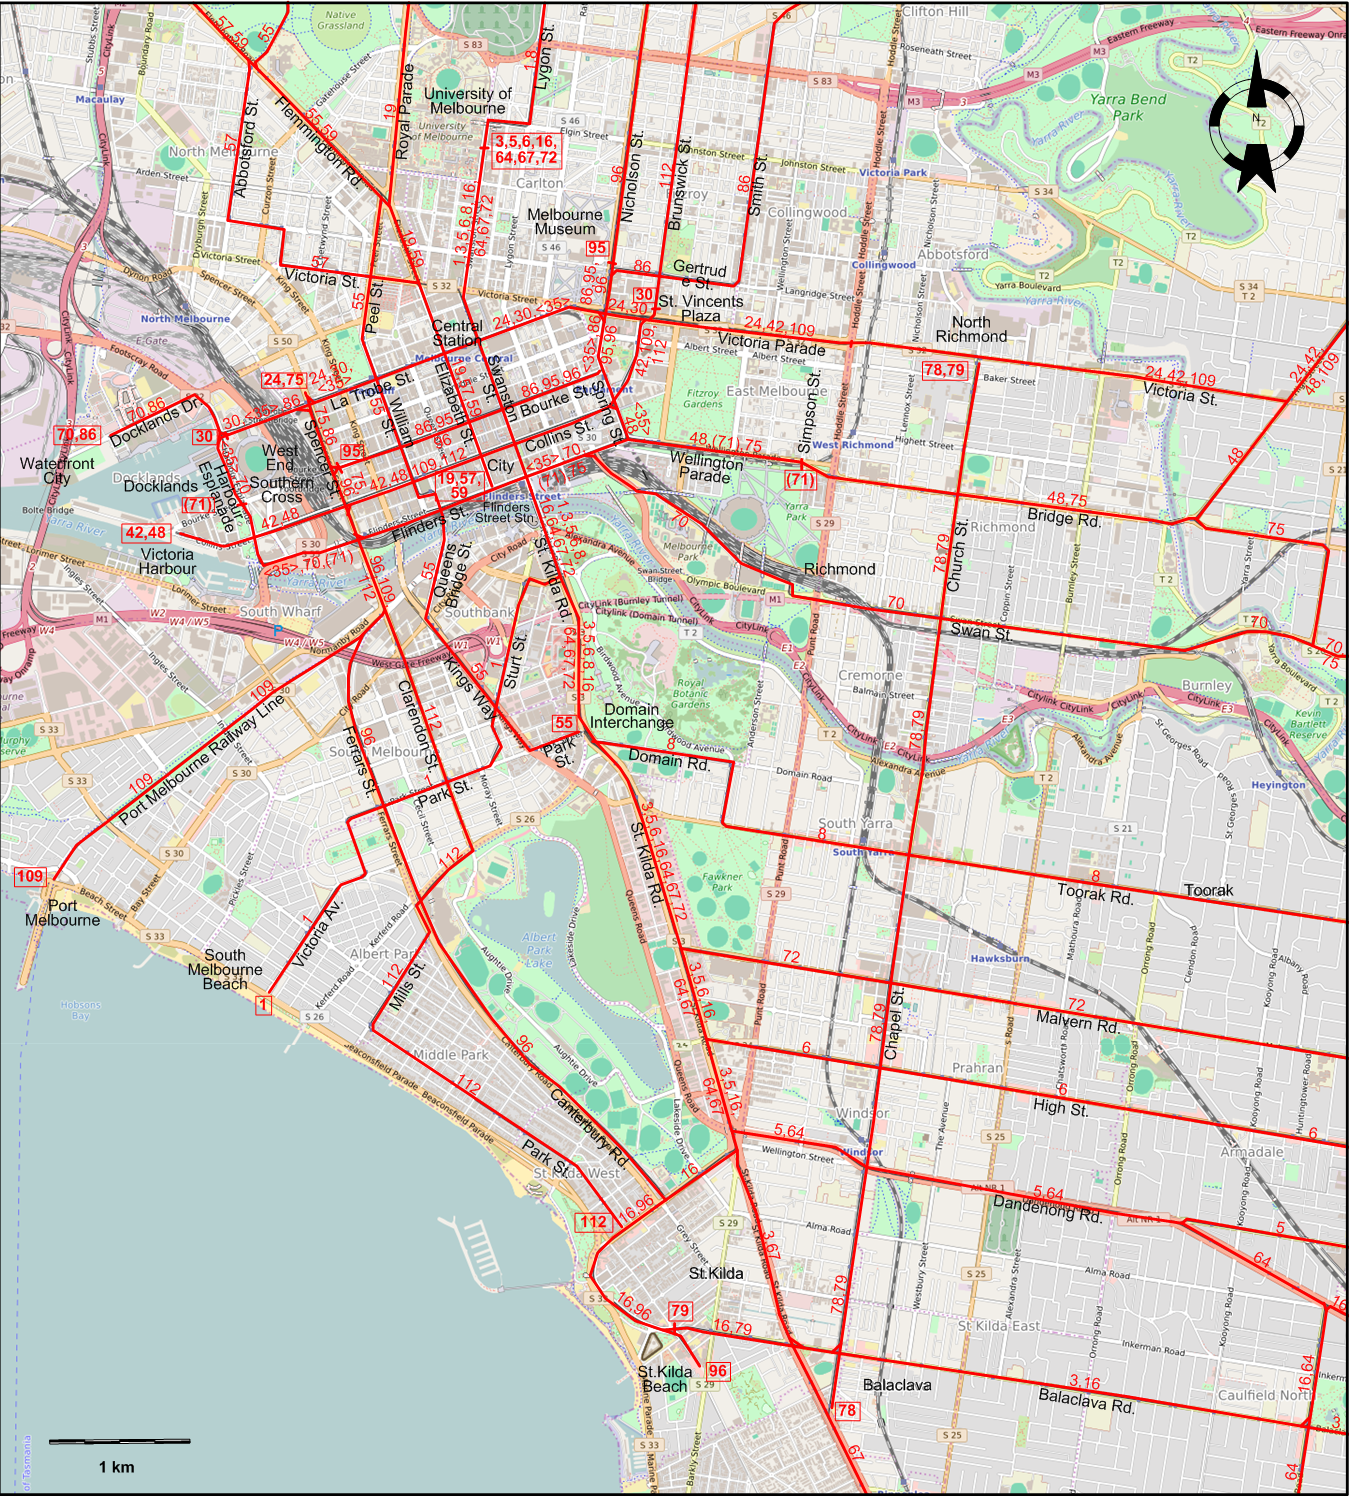 Melbourne-2009 downtown tram map